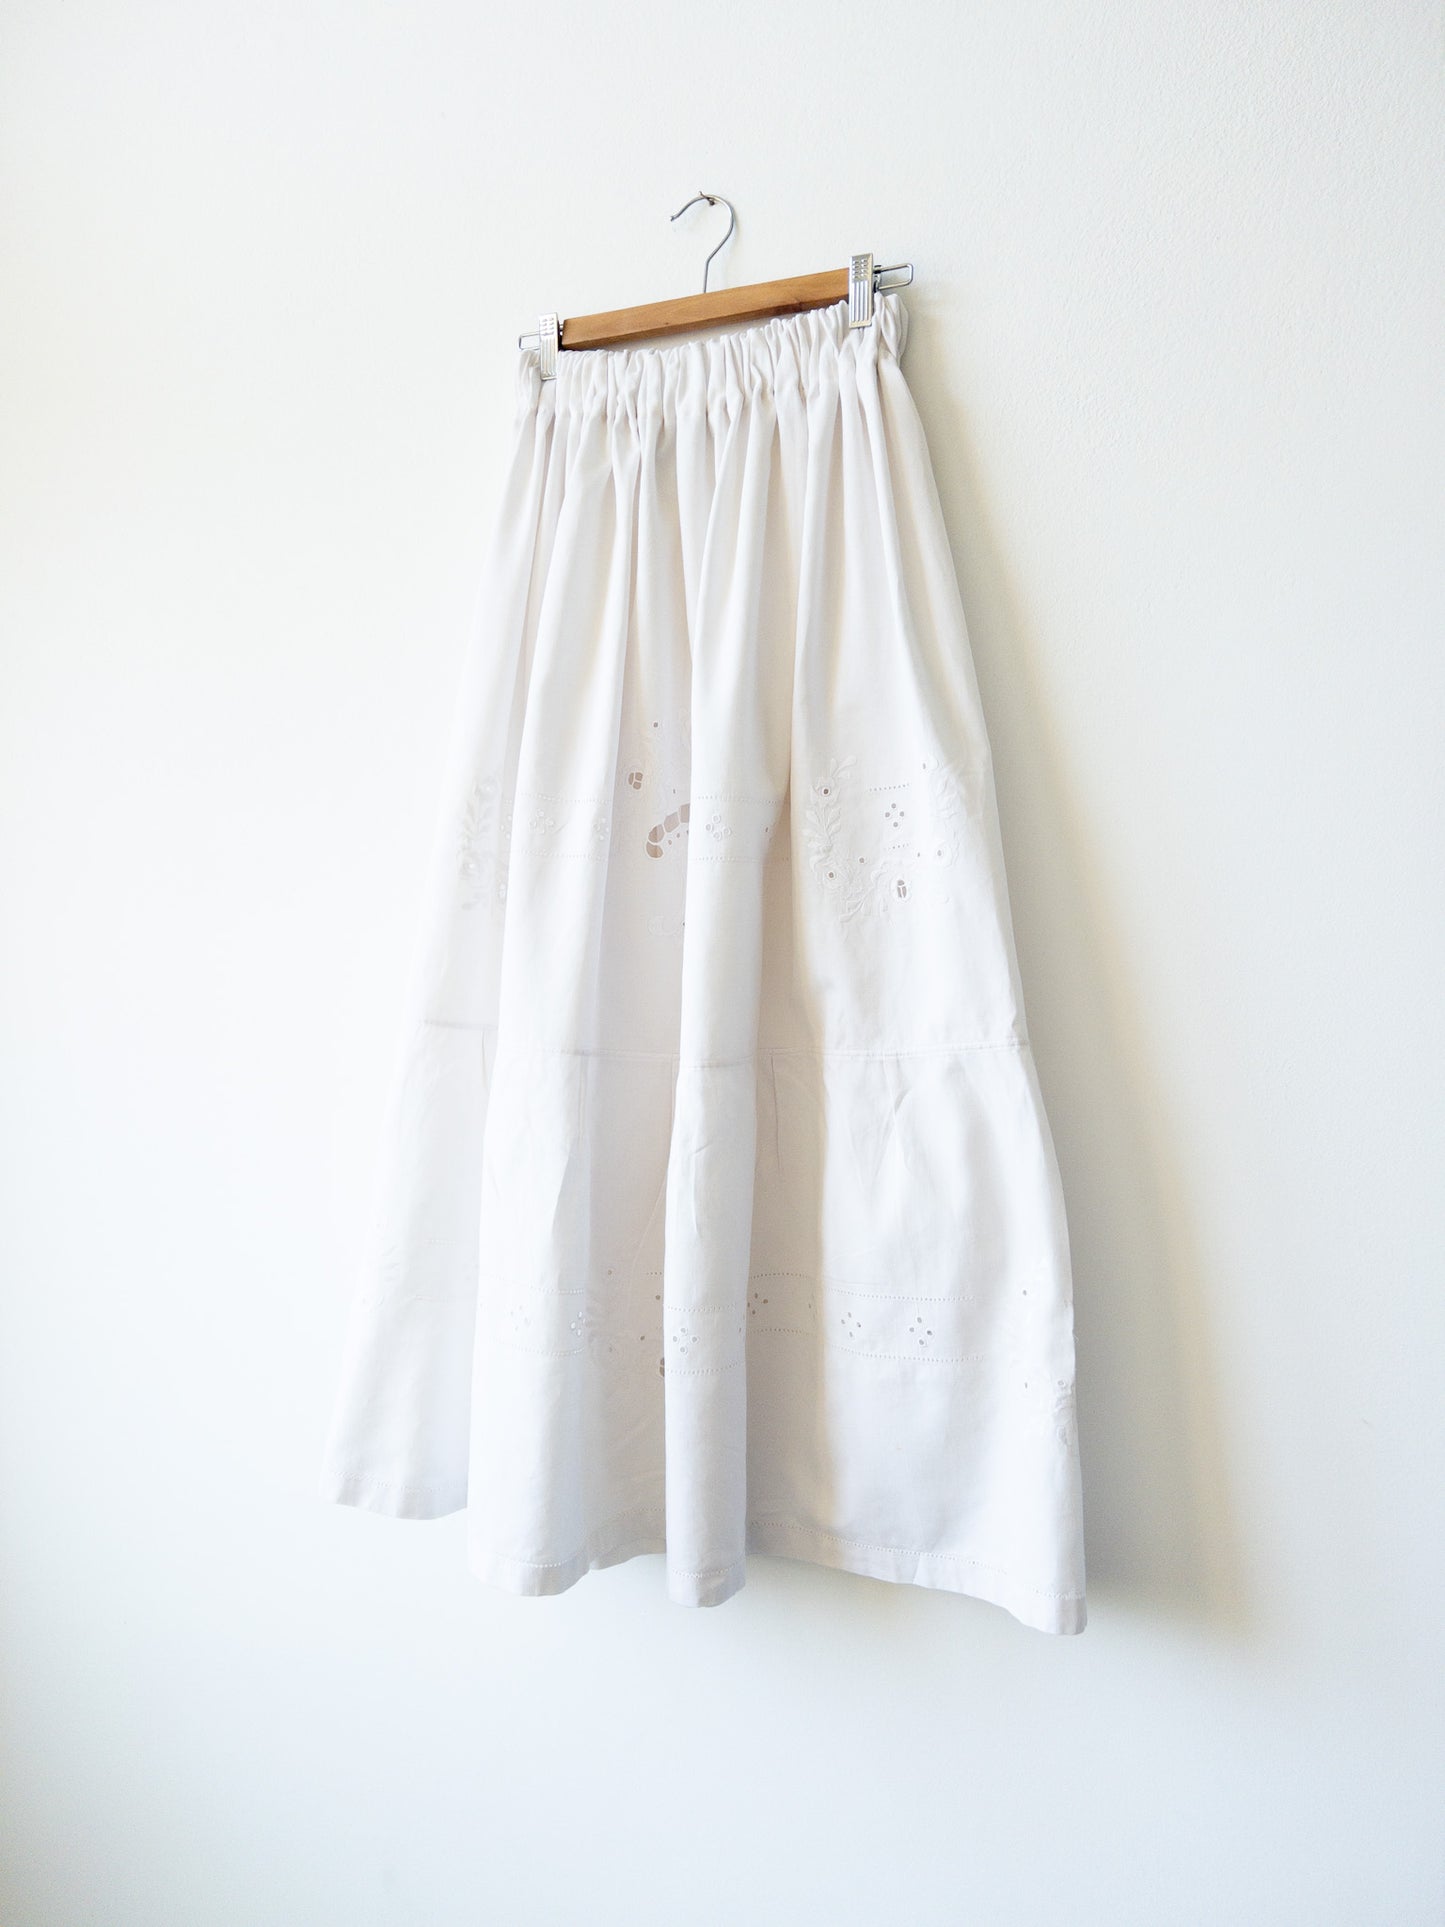 Skirt made of embroidered canvas